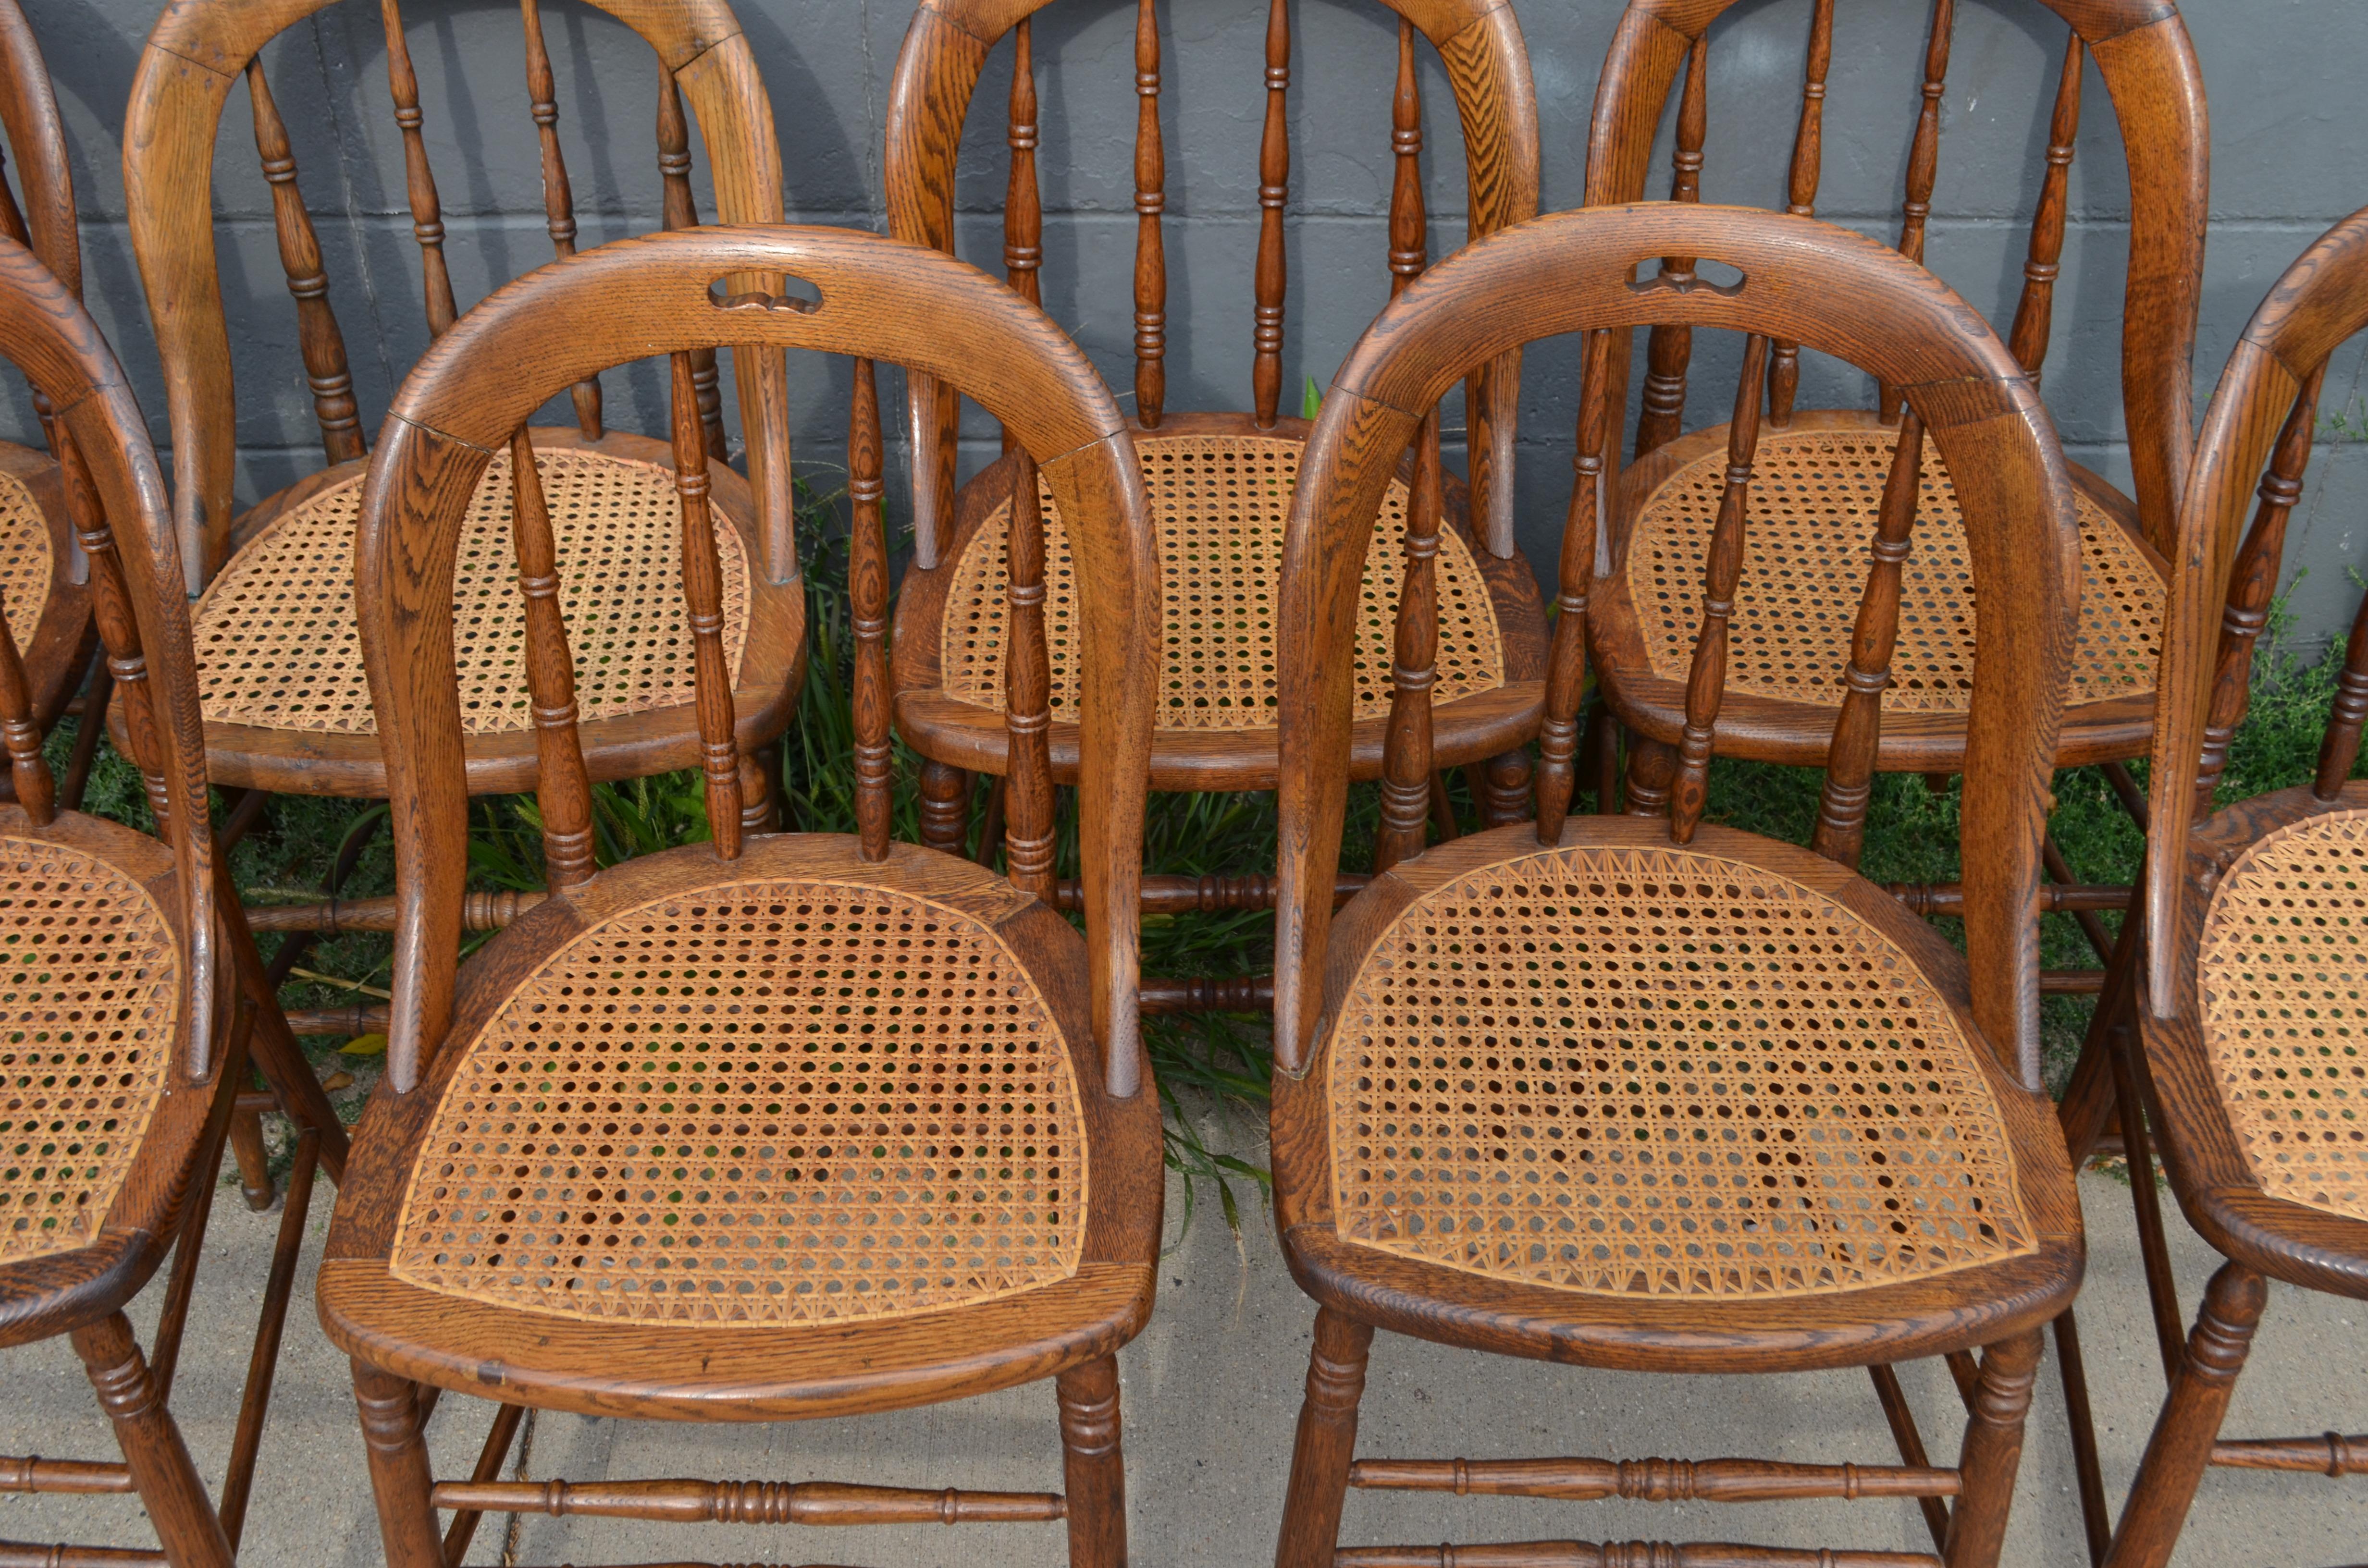 Pine Dining Room Chairs with Caned Seats, Victorian Windsor Bow Back Style, Set of 8